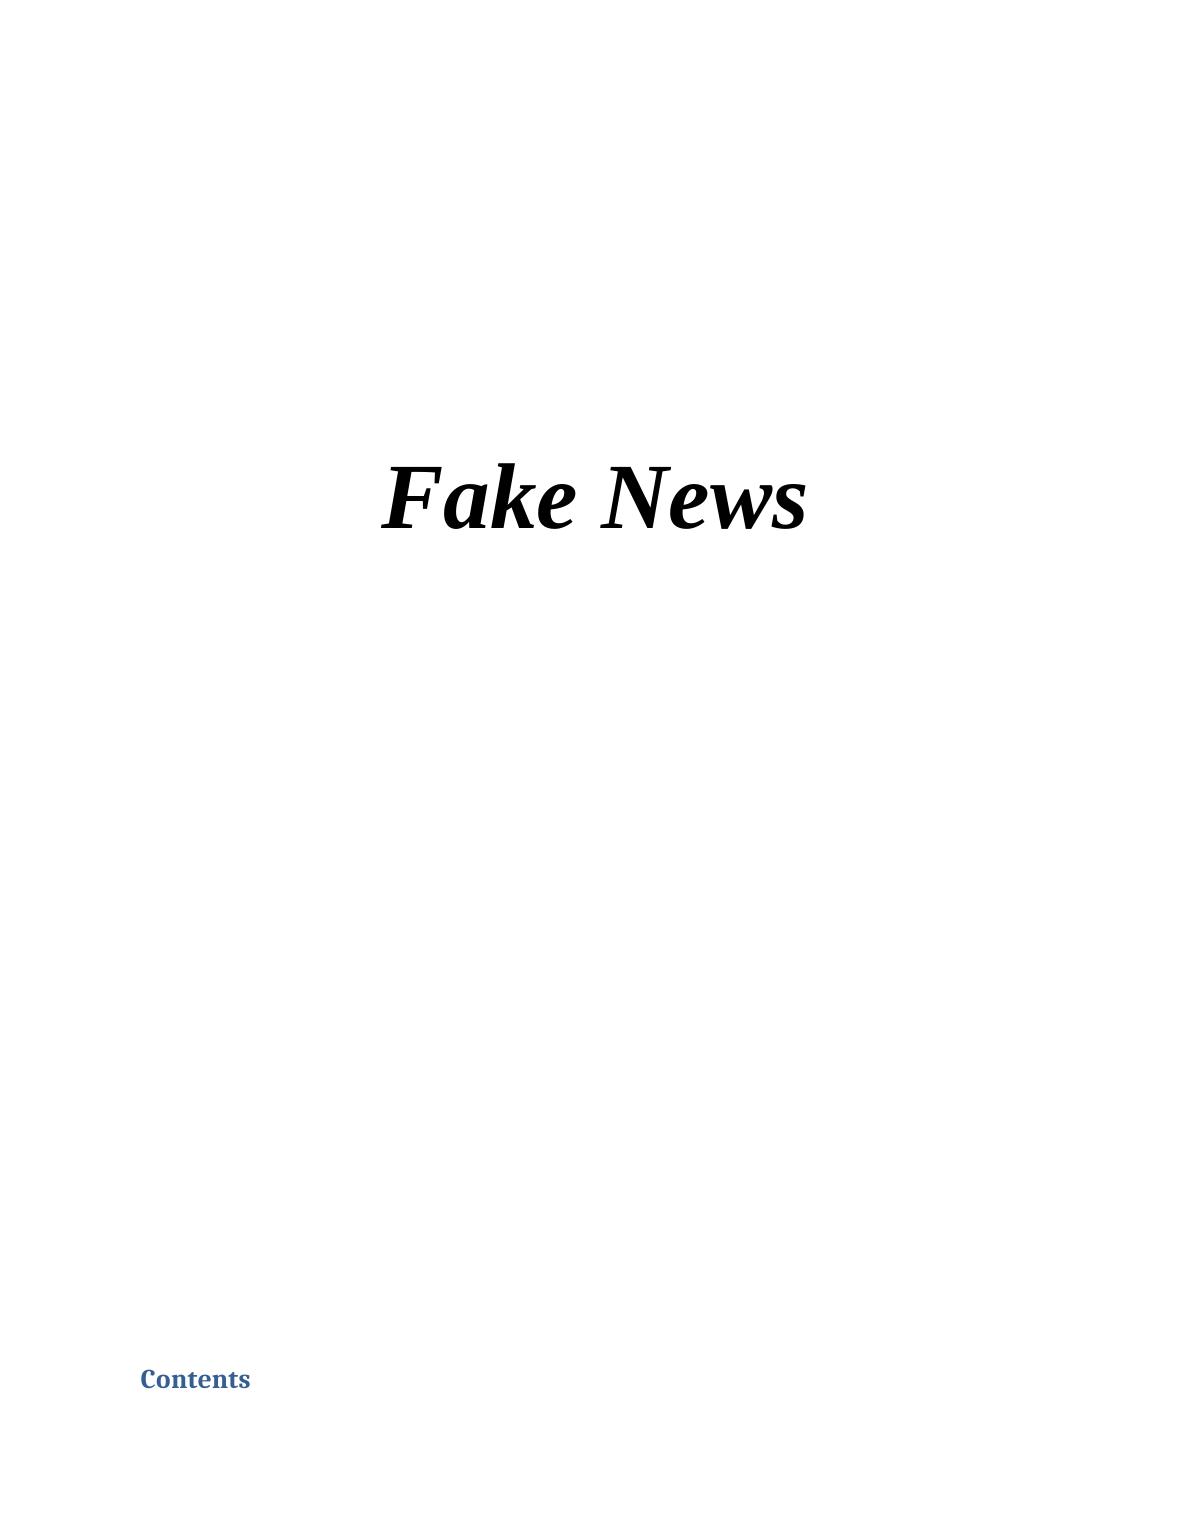 Fake News: The Role of Press in the 21st Century_1